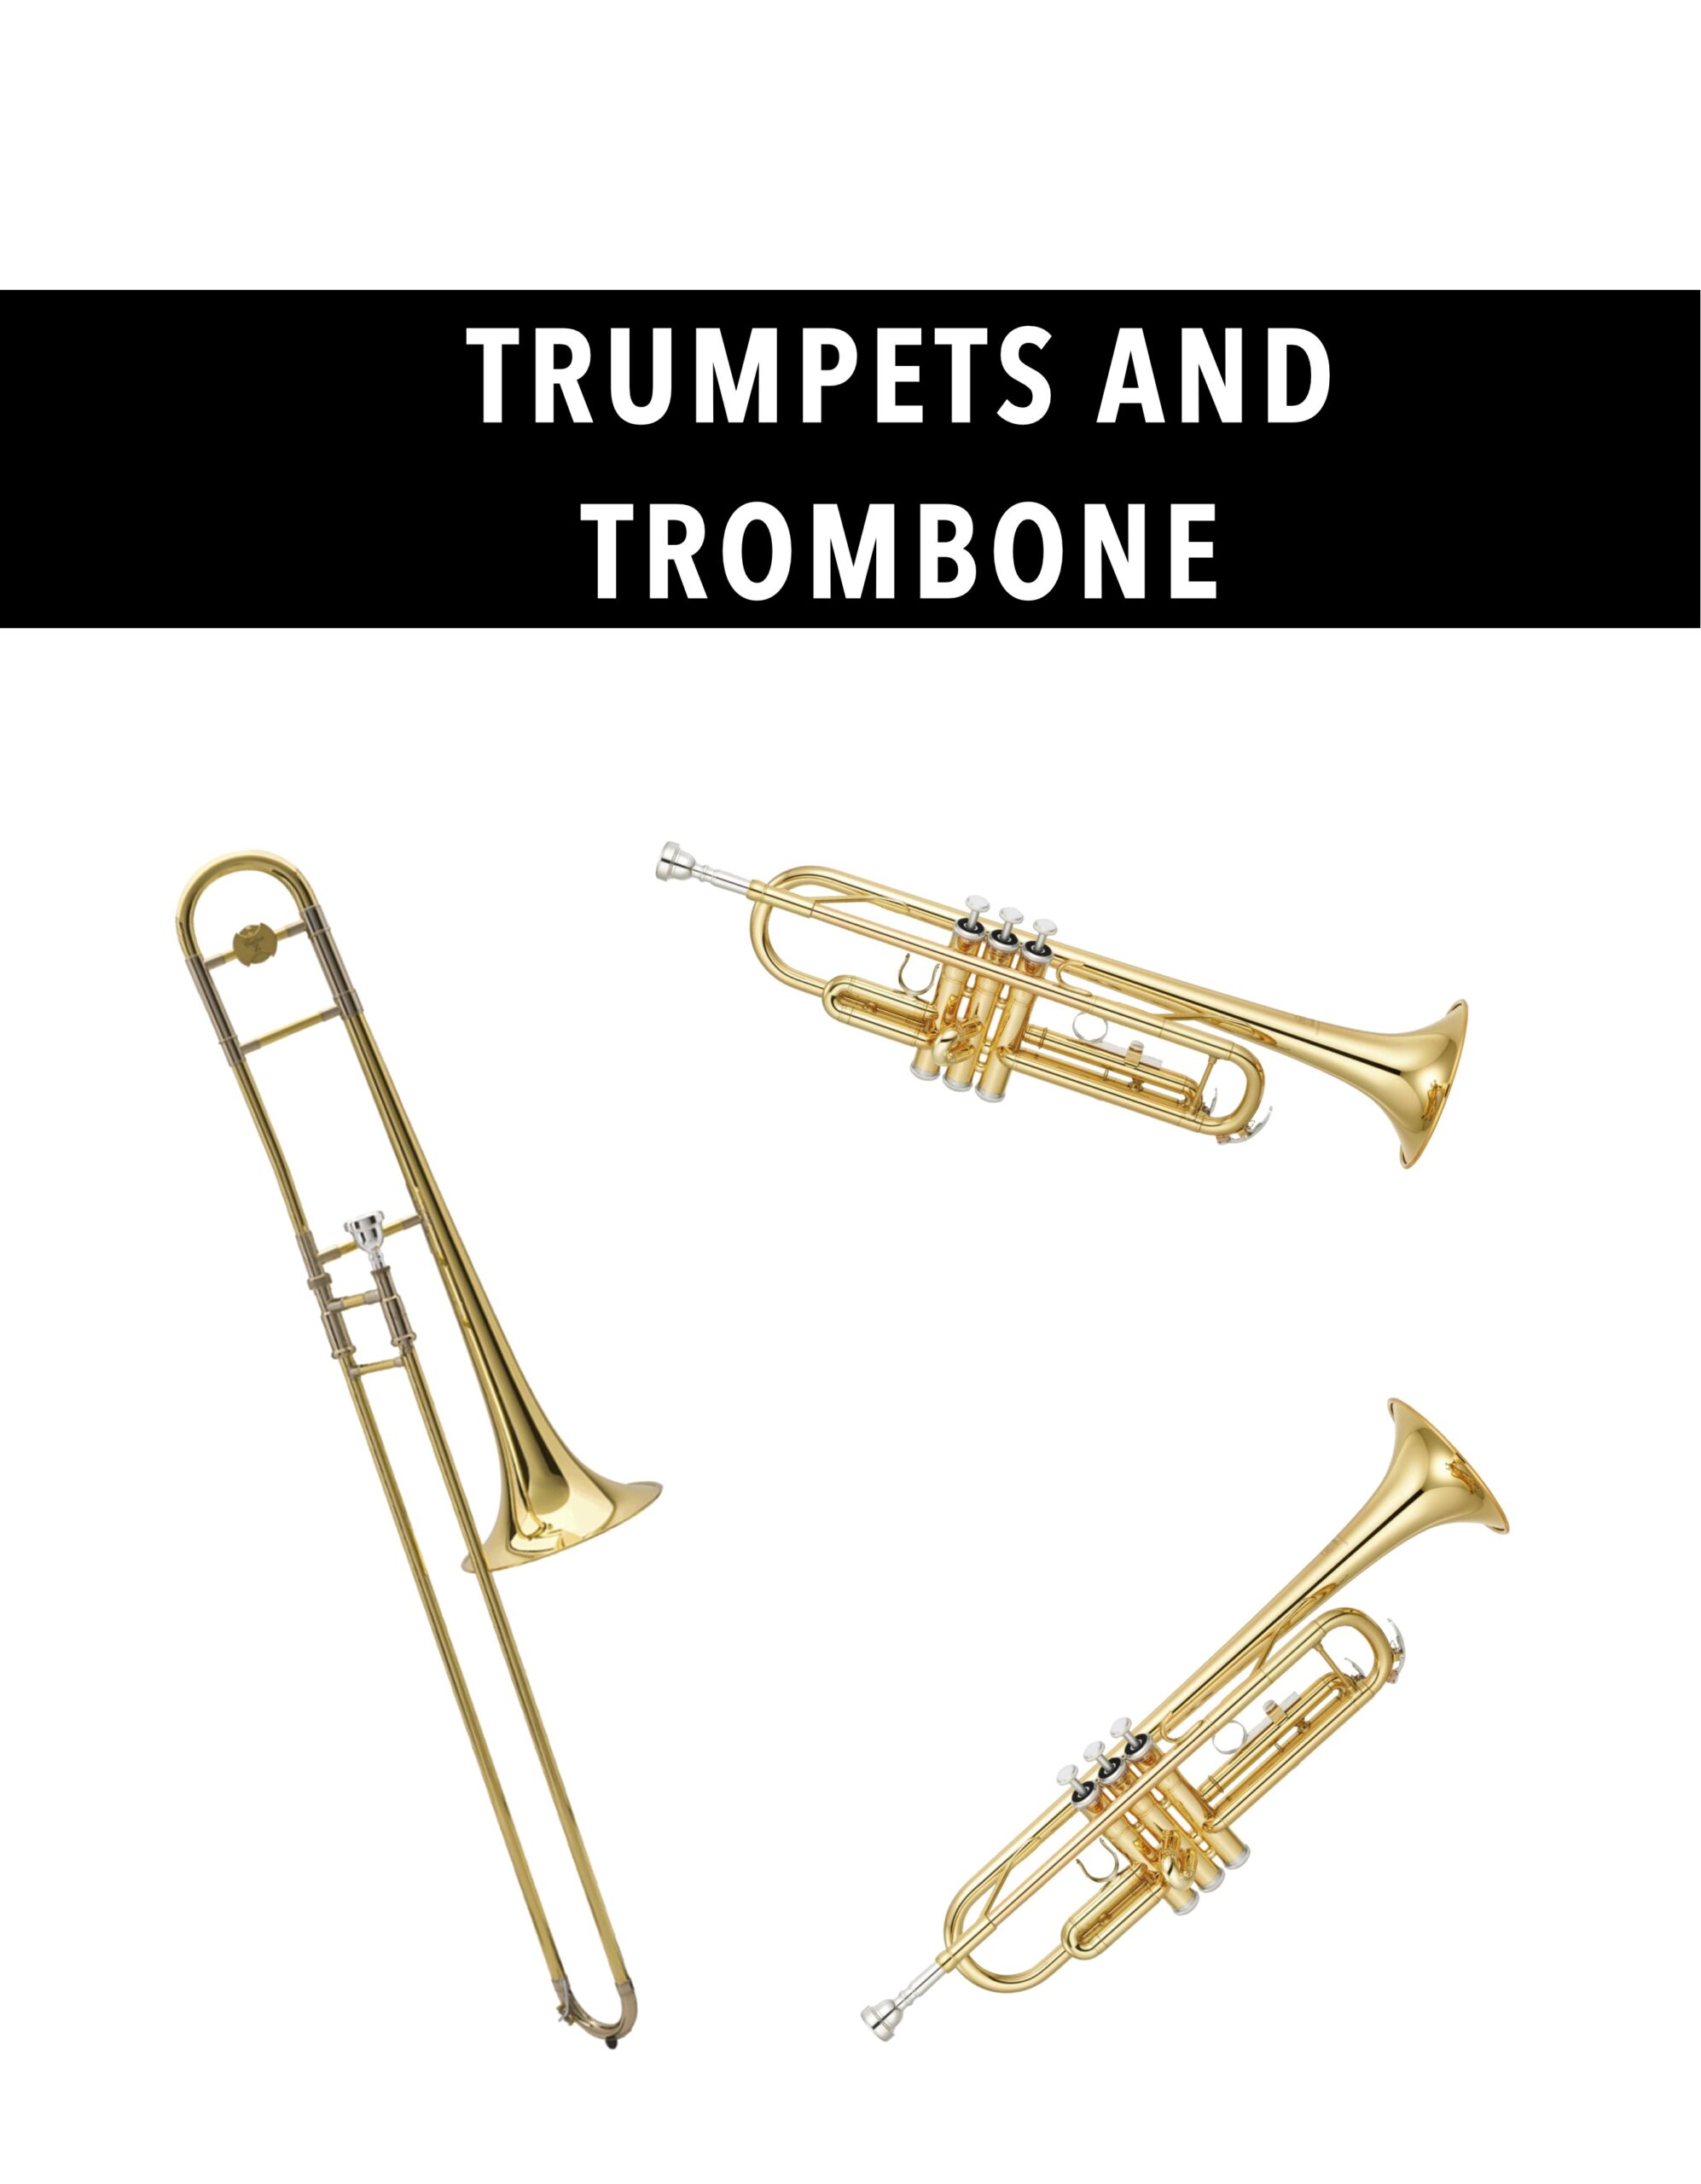 Two Trumpets and Trombone